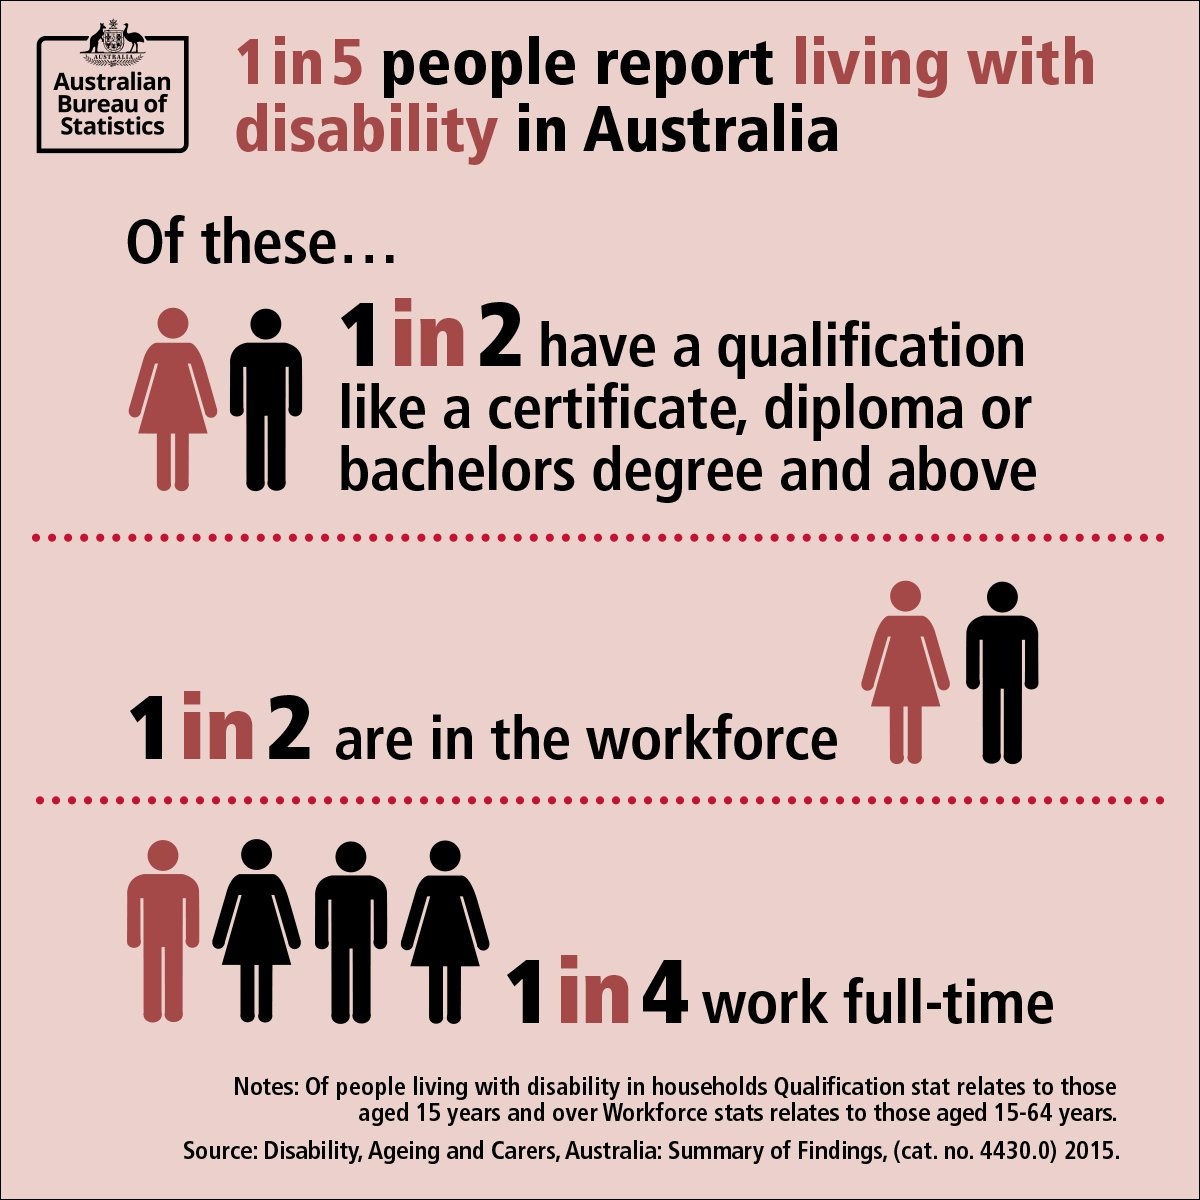 A graphic, maroon and black text on pink background. Statistics describing the nuber of people in Australia living with a disability, their qualifications and workforce representation.